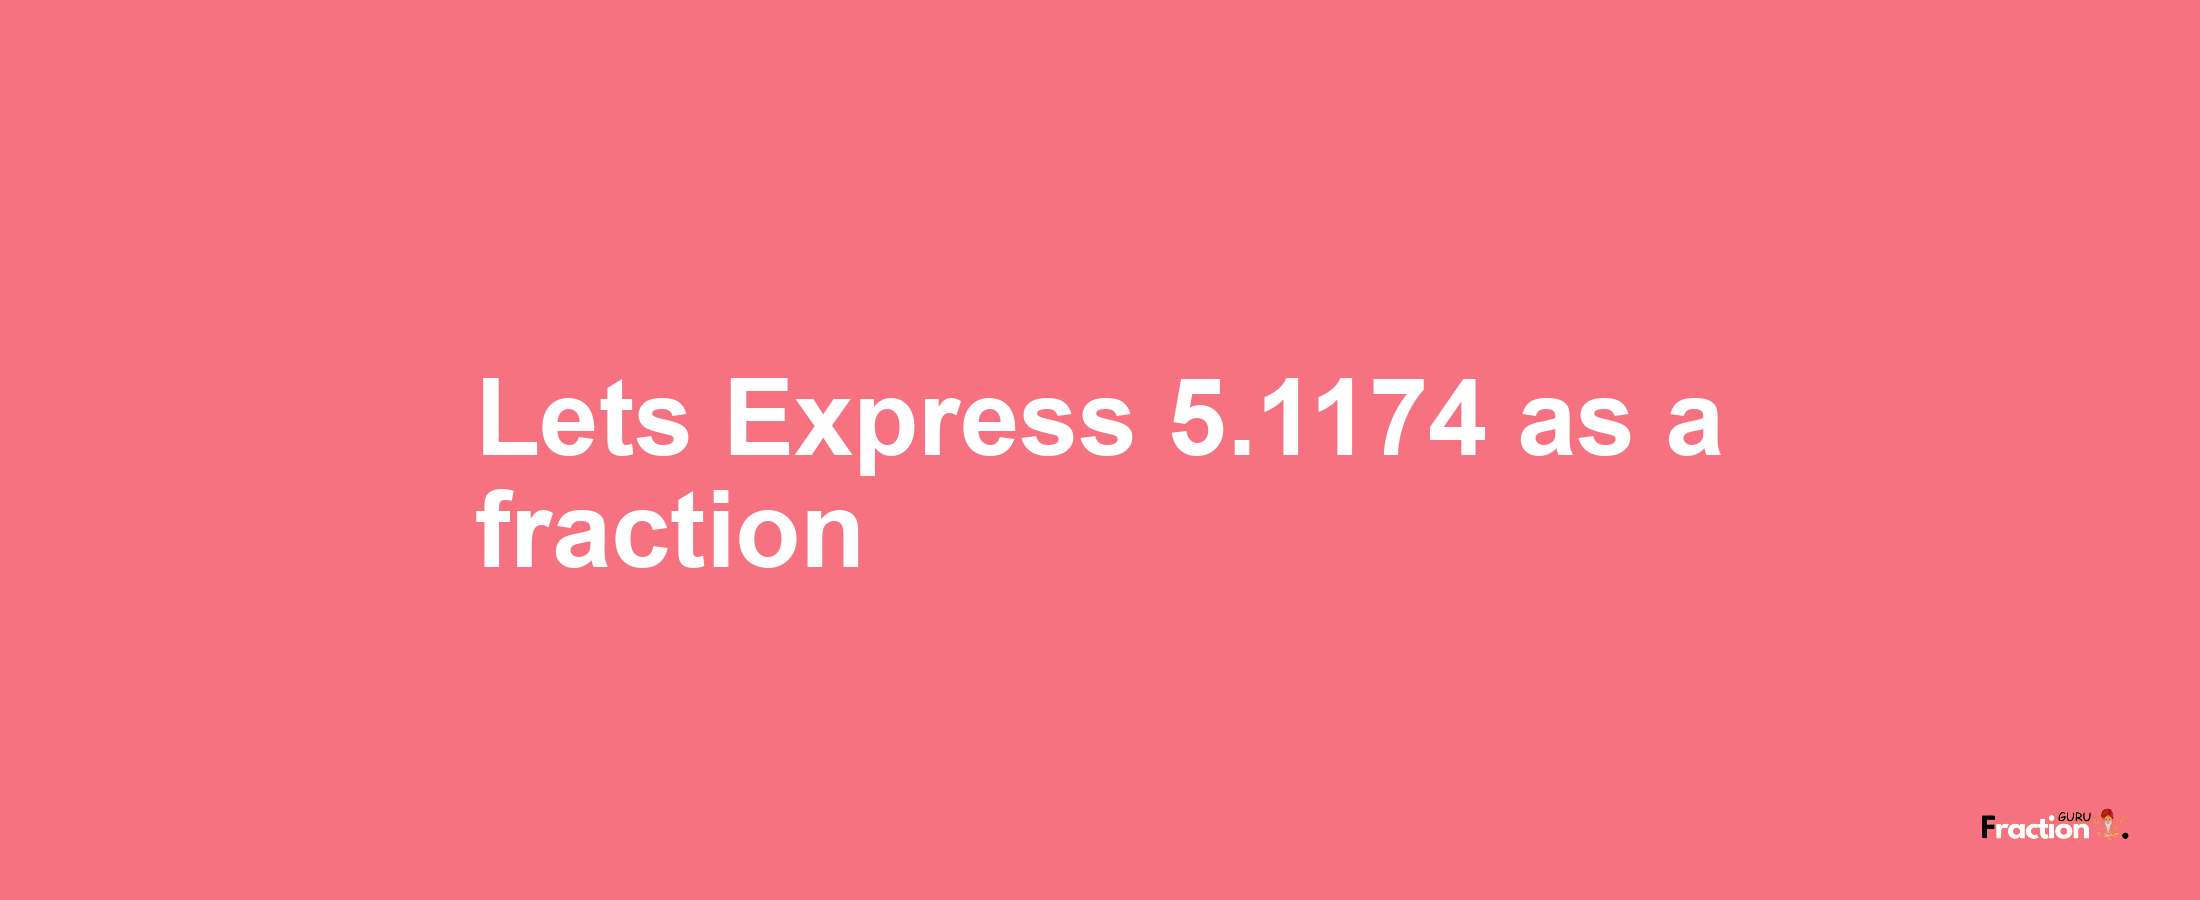 Lets Express 5.1174 as afraction